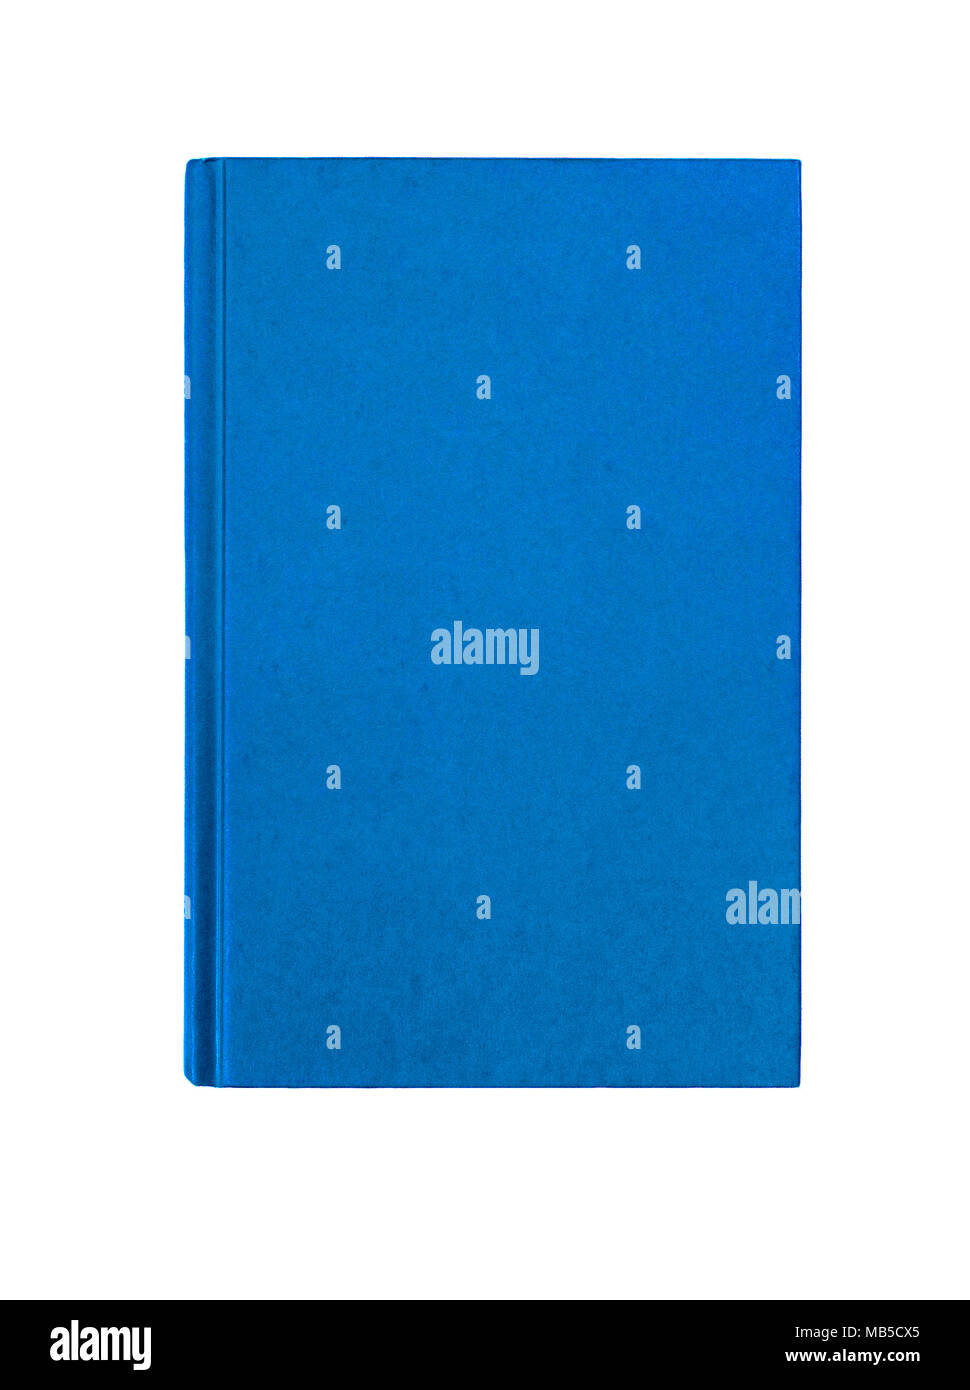 Bright  blue plain hardcover book front cover upright vertical isolated on white Stock Photo